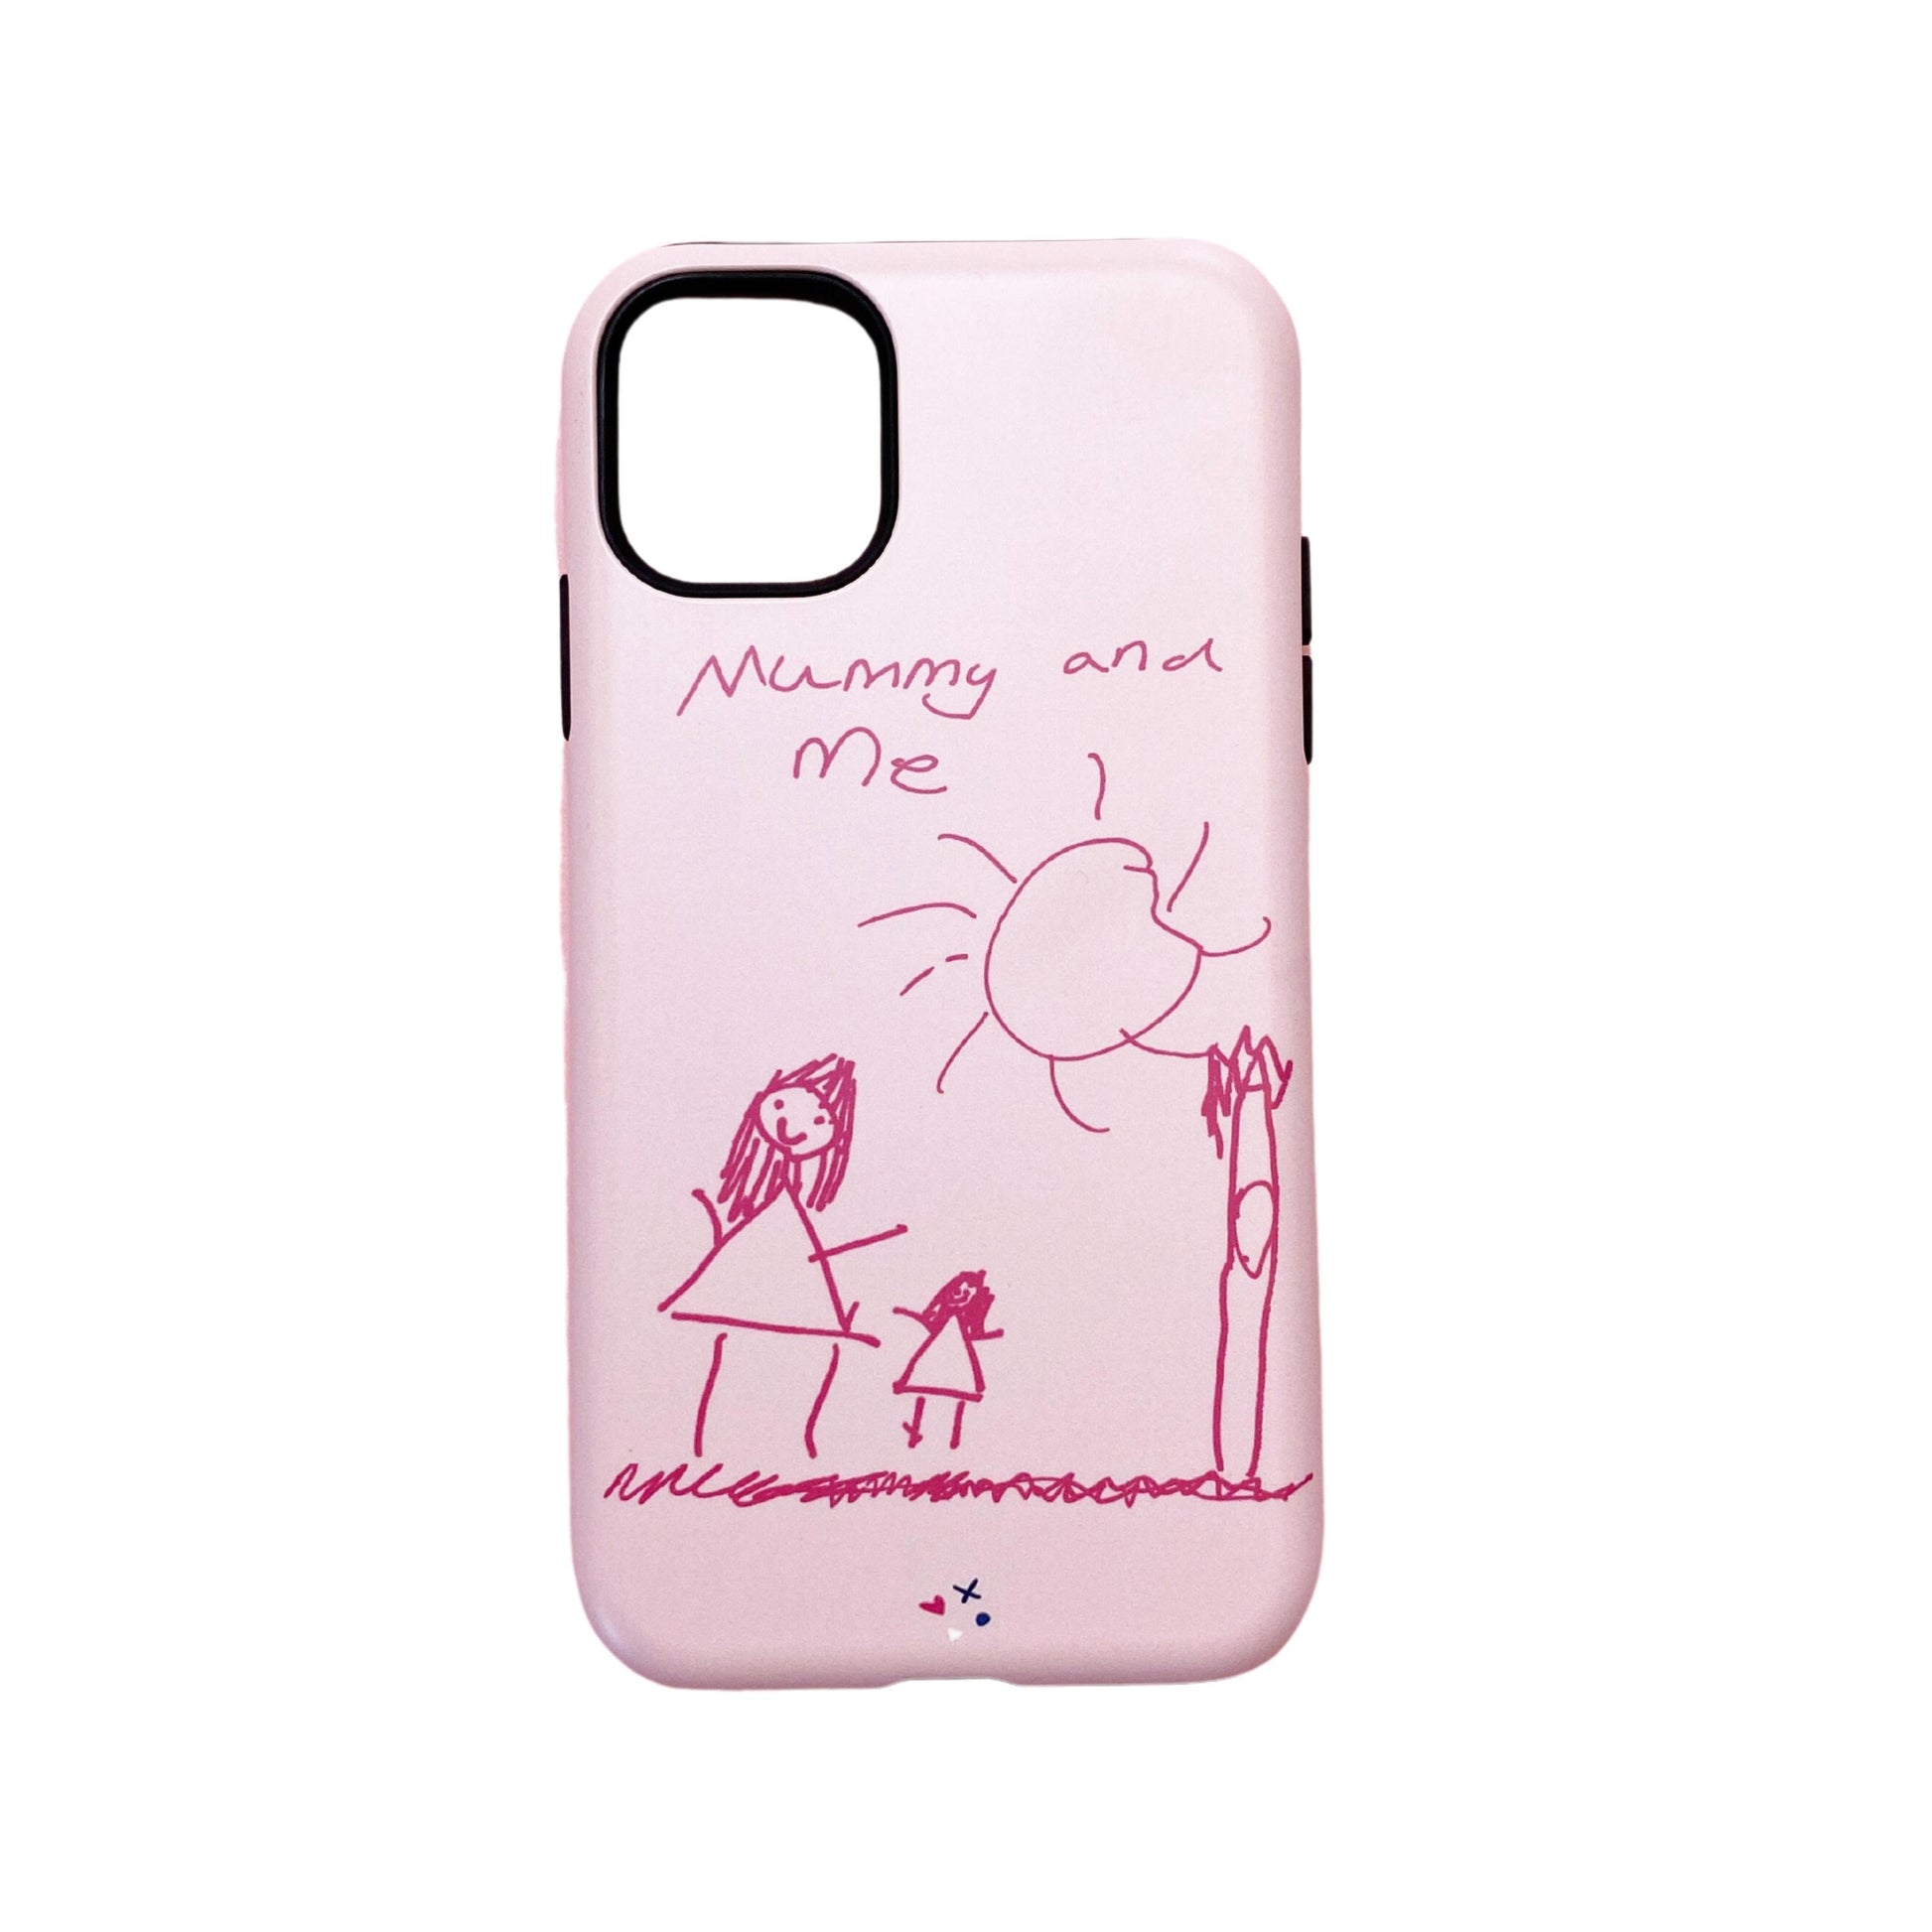 childrens drawing phone case